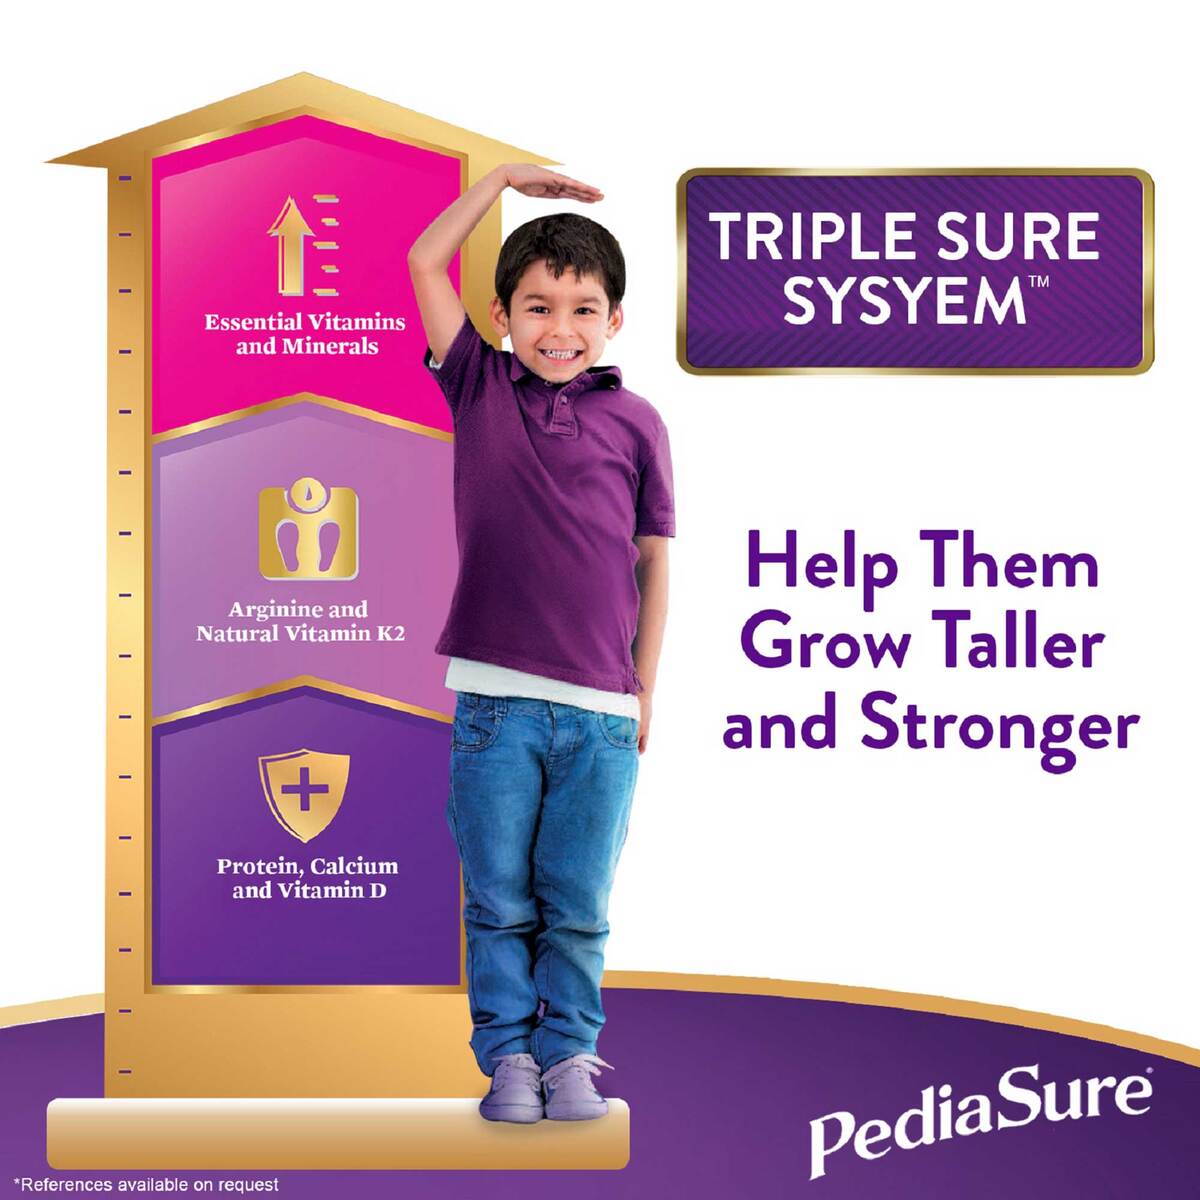 Pediasure Complete Balanced Nutrition With Vanilla Flavour Stage 1+ For Children 1-3 Years 900 g